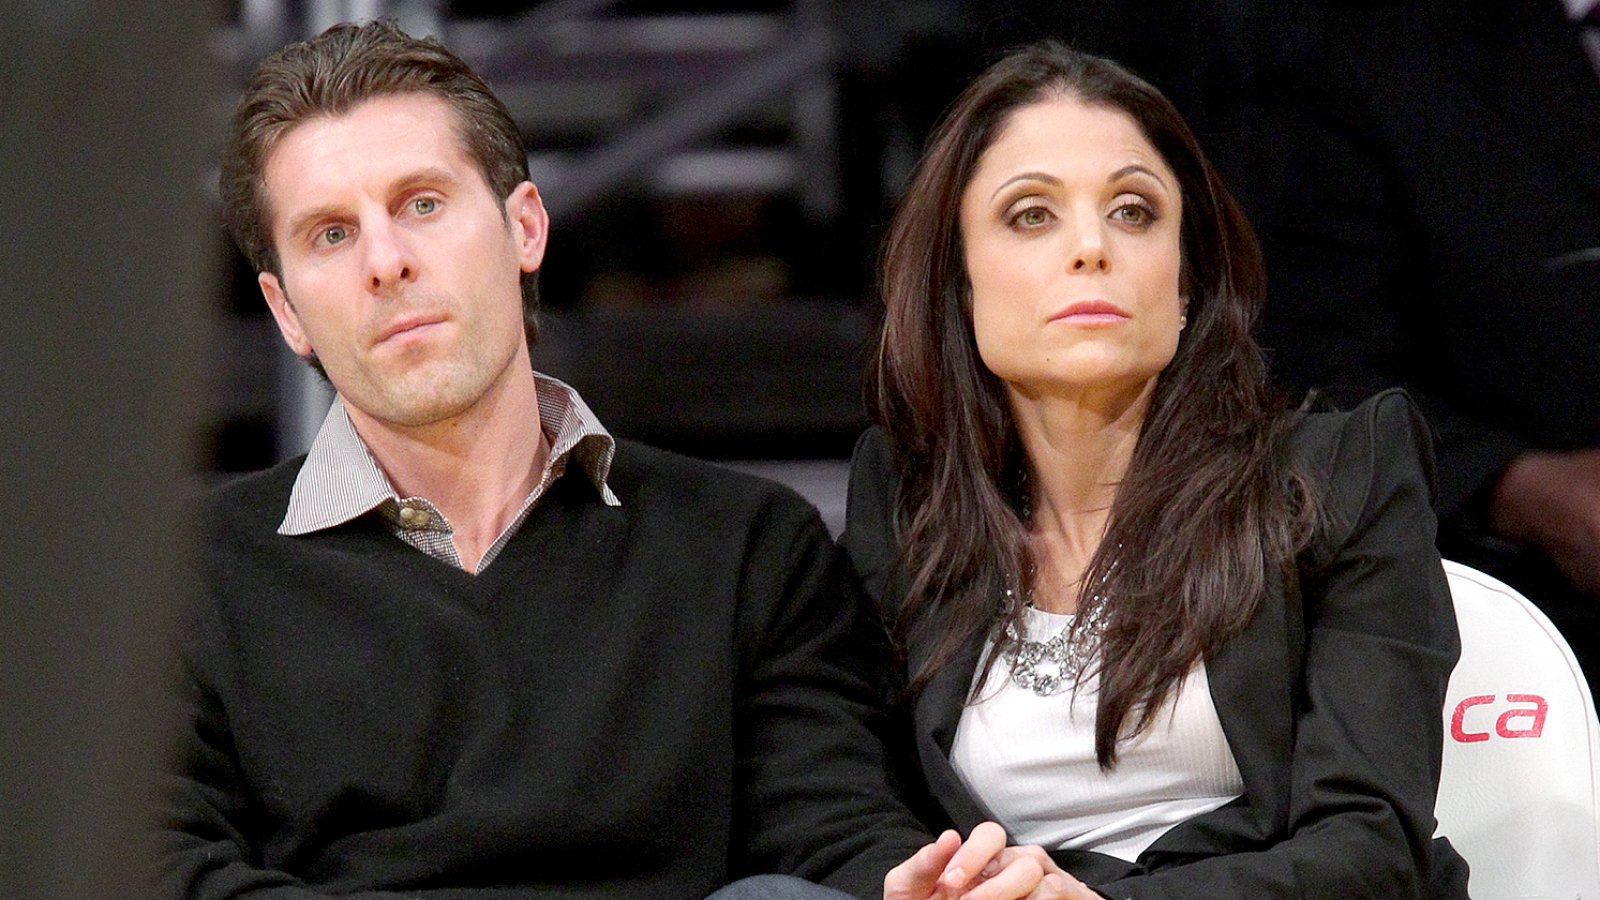 Bethenny Frankel and Jason Hoppy attend a game between the Sacramento Kings and the Los Angeles Lakers at Staples Center on December 3, 2010 in Los Angeles, California.